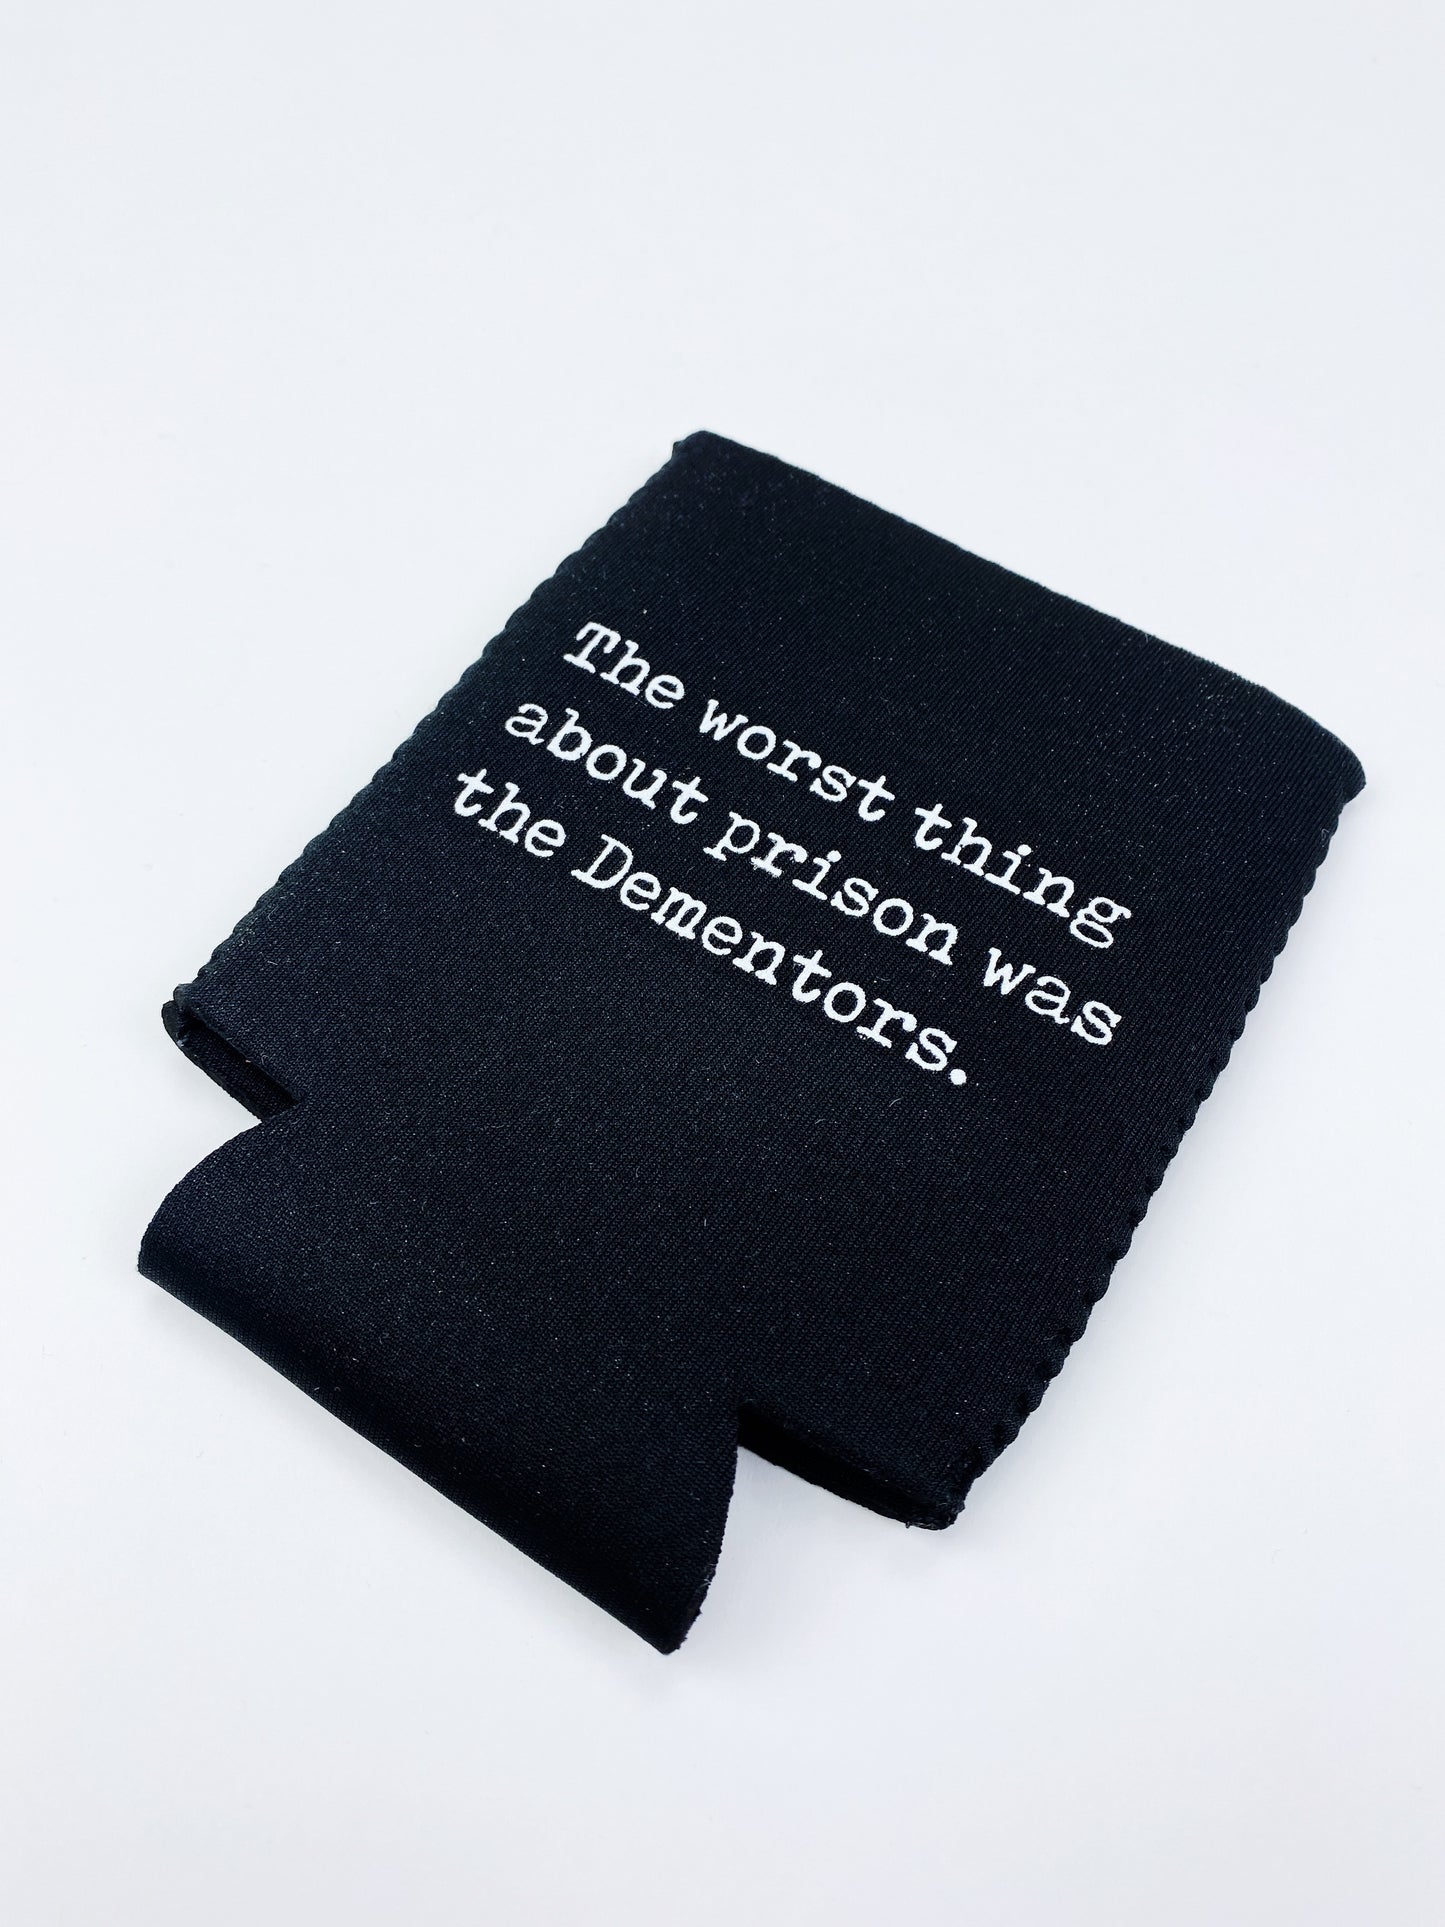 The Office Dementors Koozie - Totally Good Time